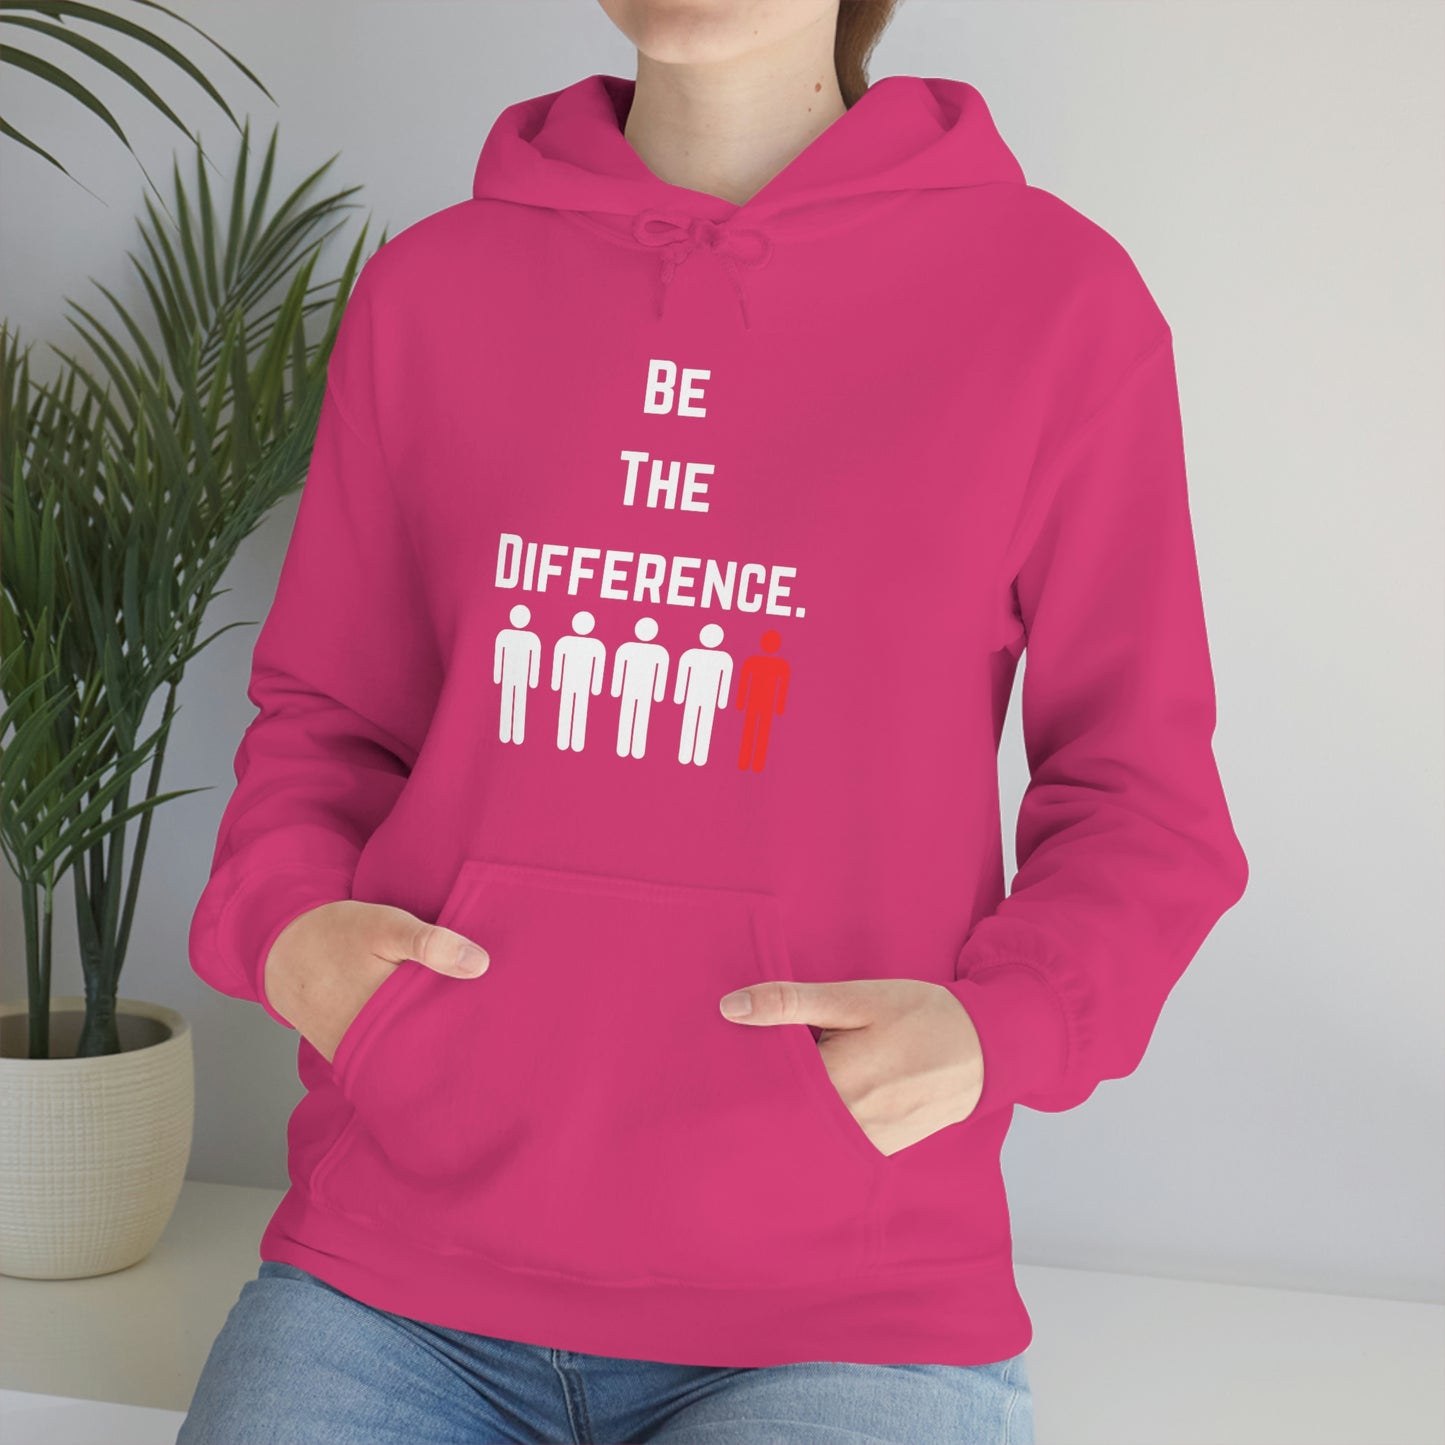 Be The Difference. Hoodie